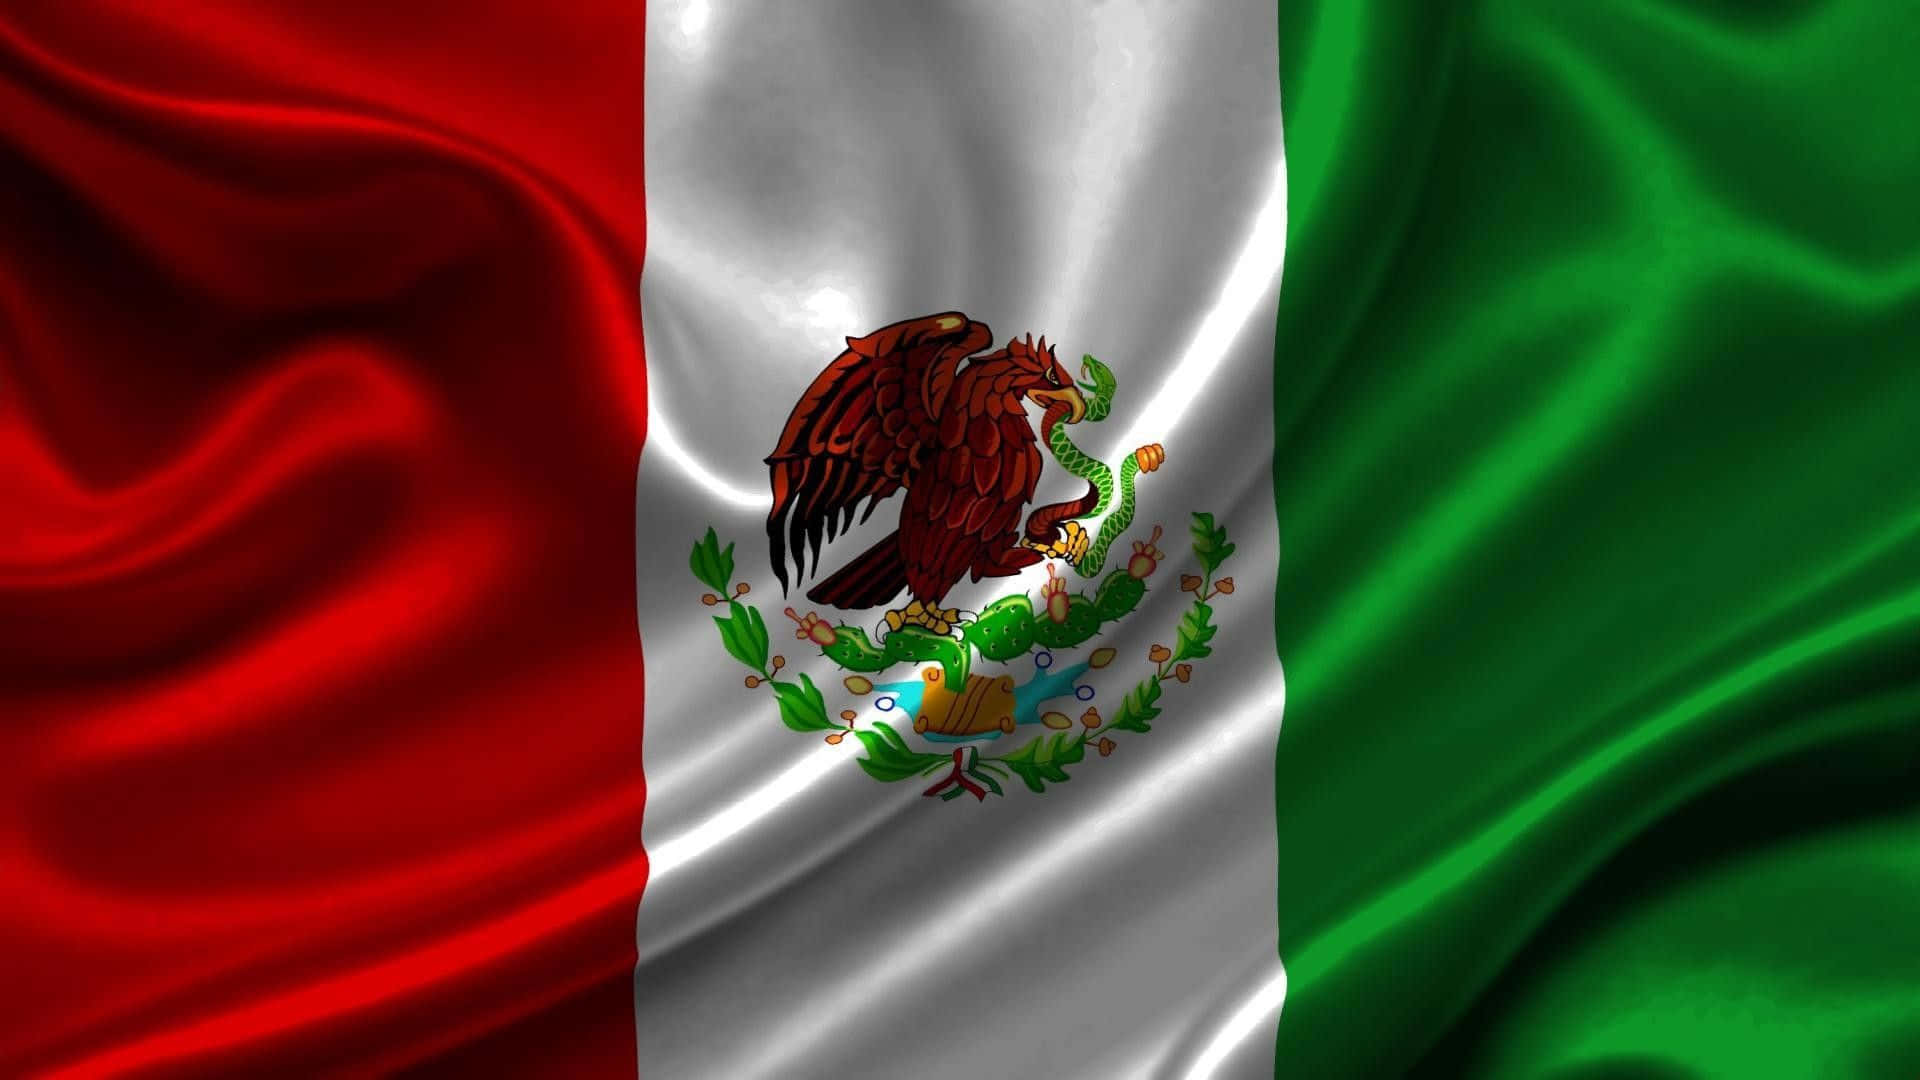 The Flag Of Mexico Is Shown In A Beautiful Way Wallpaper